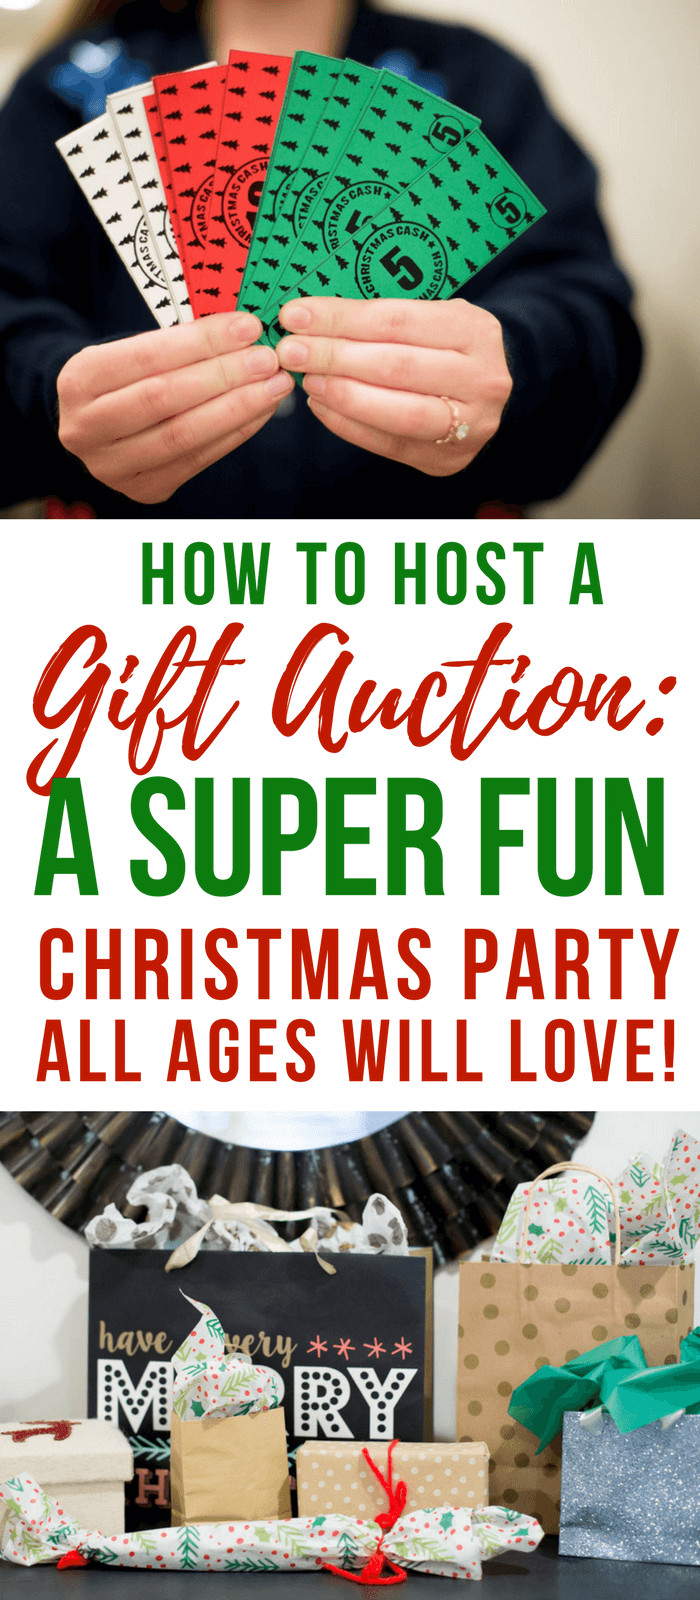 Work Christmas Party Gift Ideas
 How to Do A Christmas Party Gift Auction White Elephant